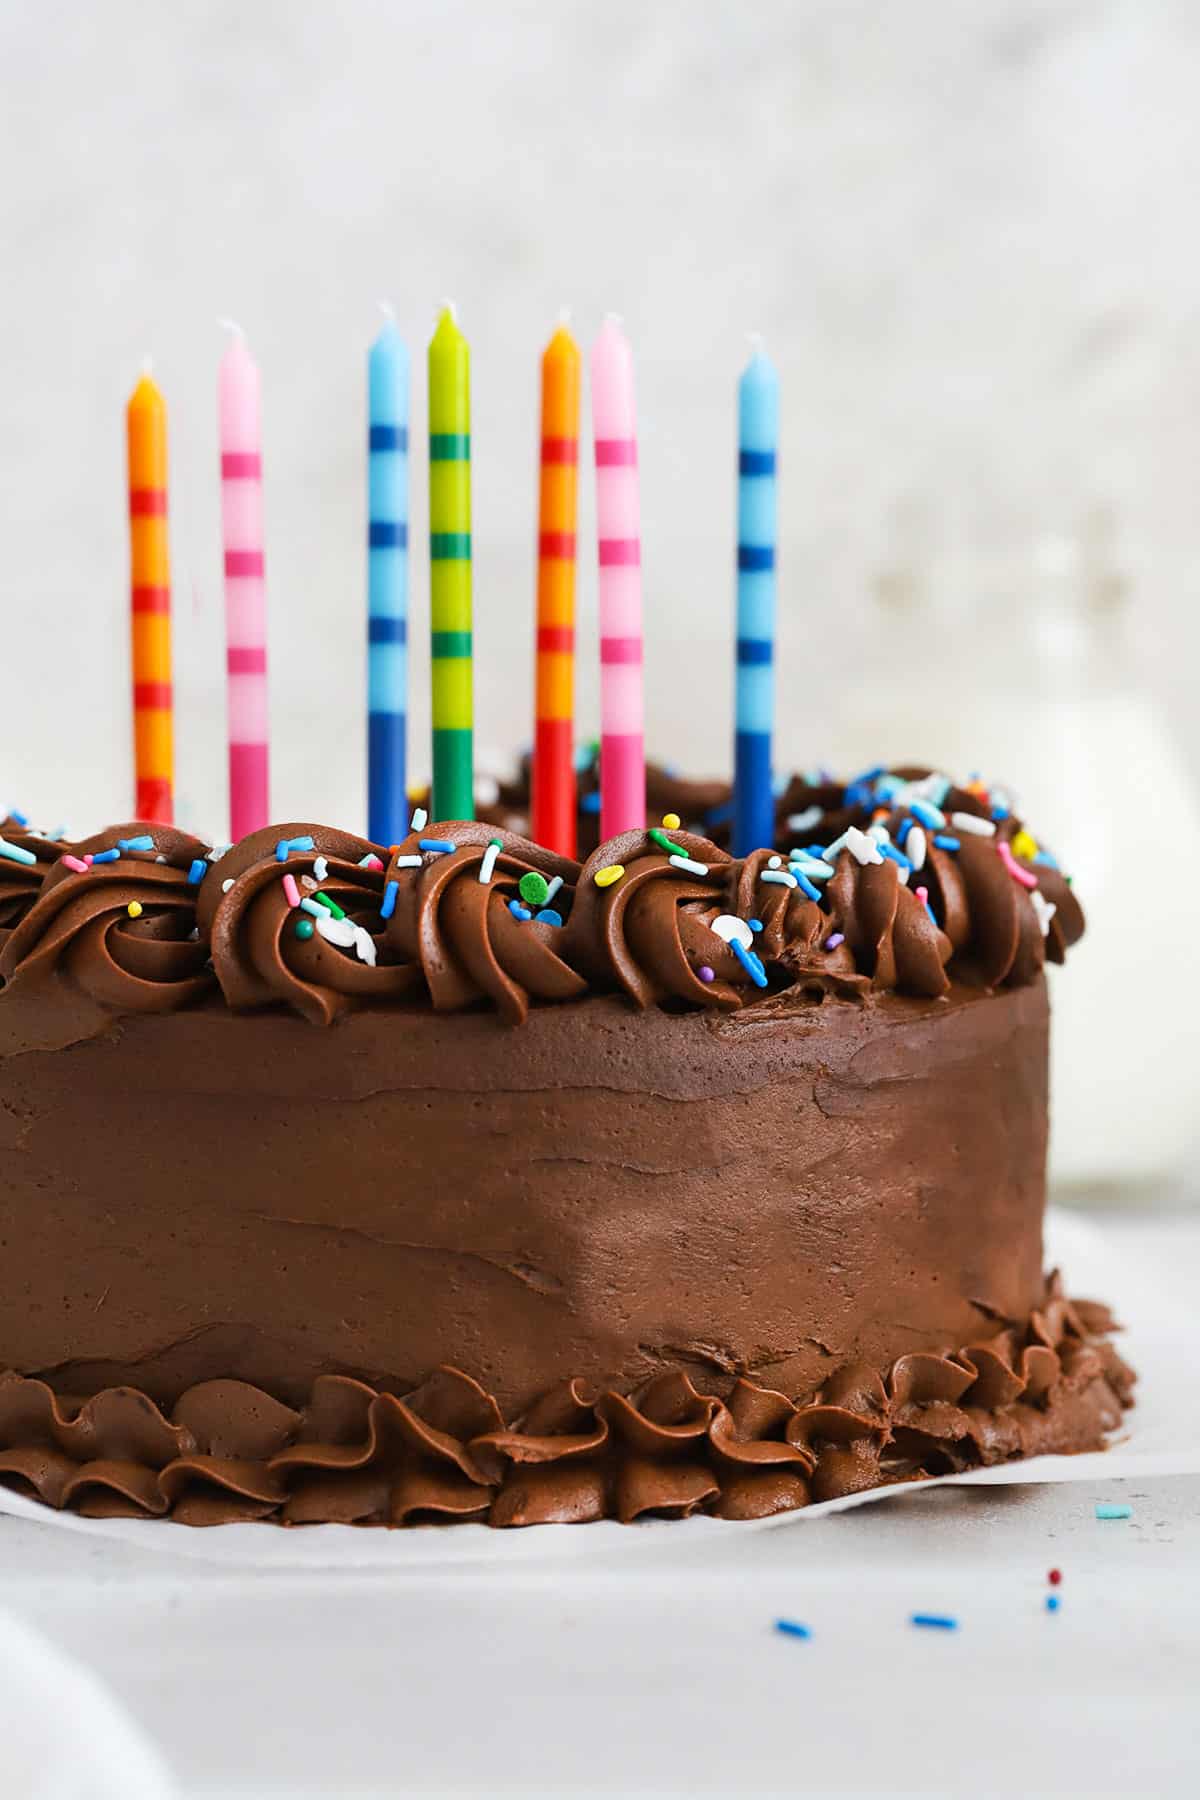 gluten-free vanilla cake with chocolate frosting, colorful sprinkles, and colorful striped birthday candles